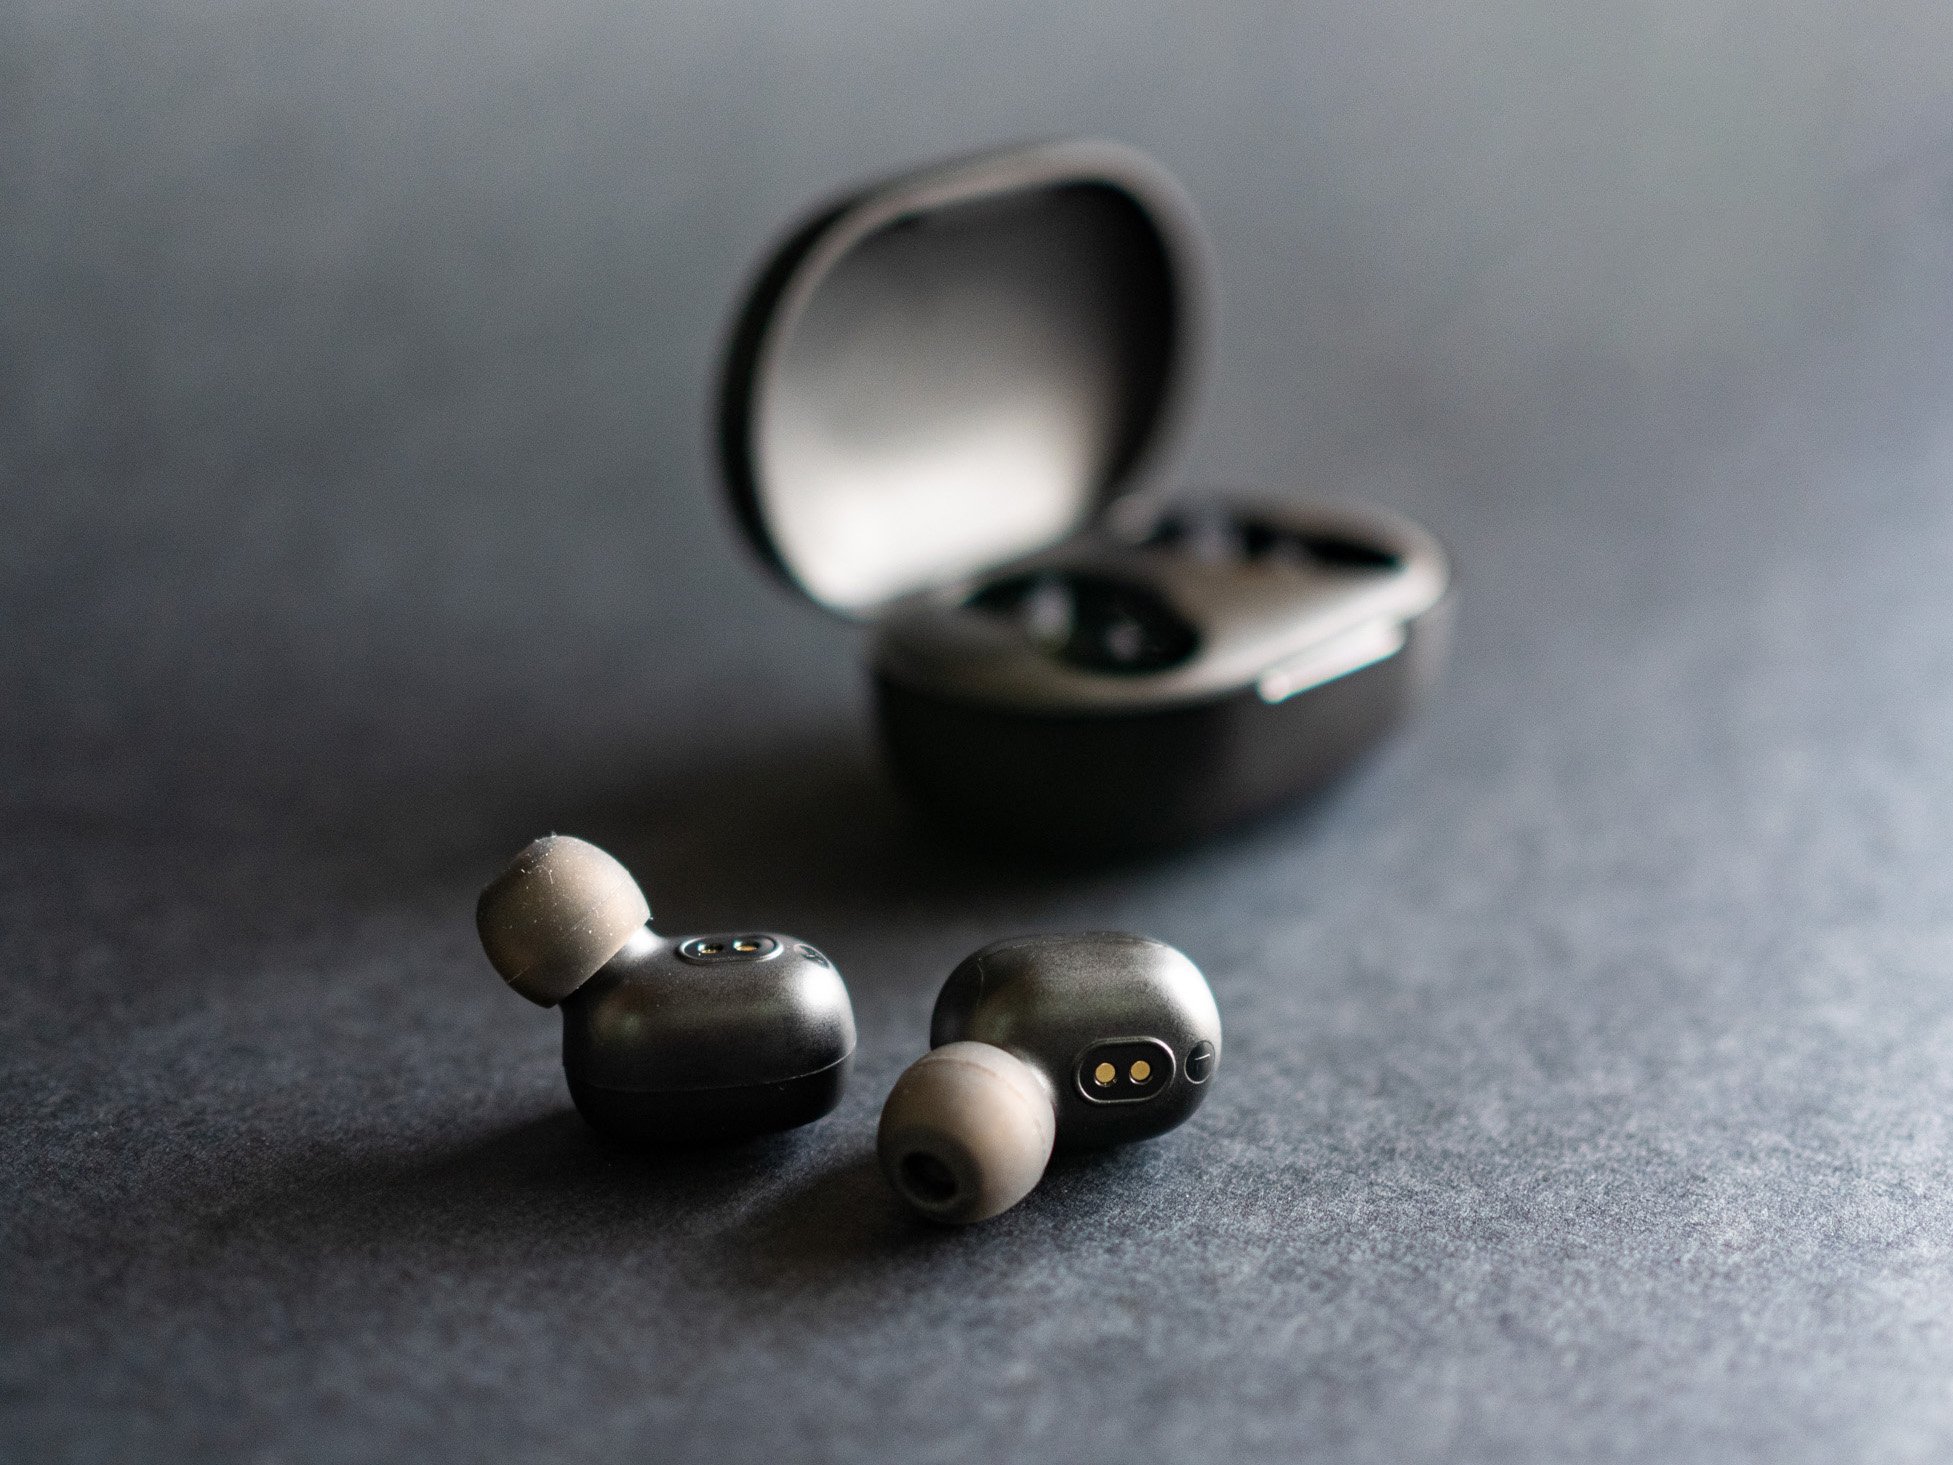 Redmi Earbuds S review